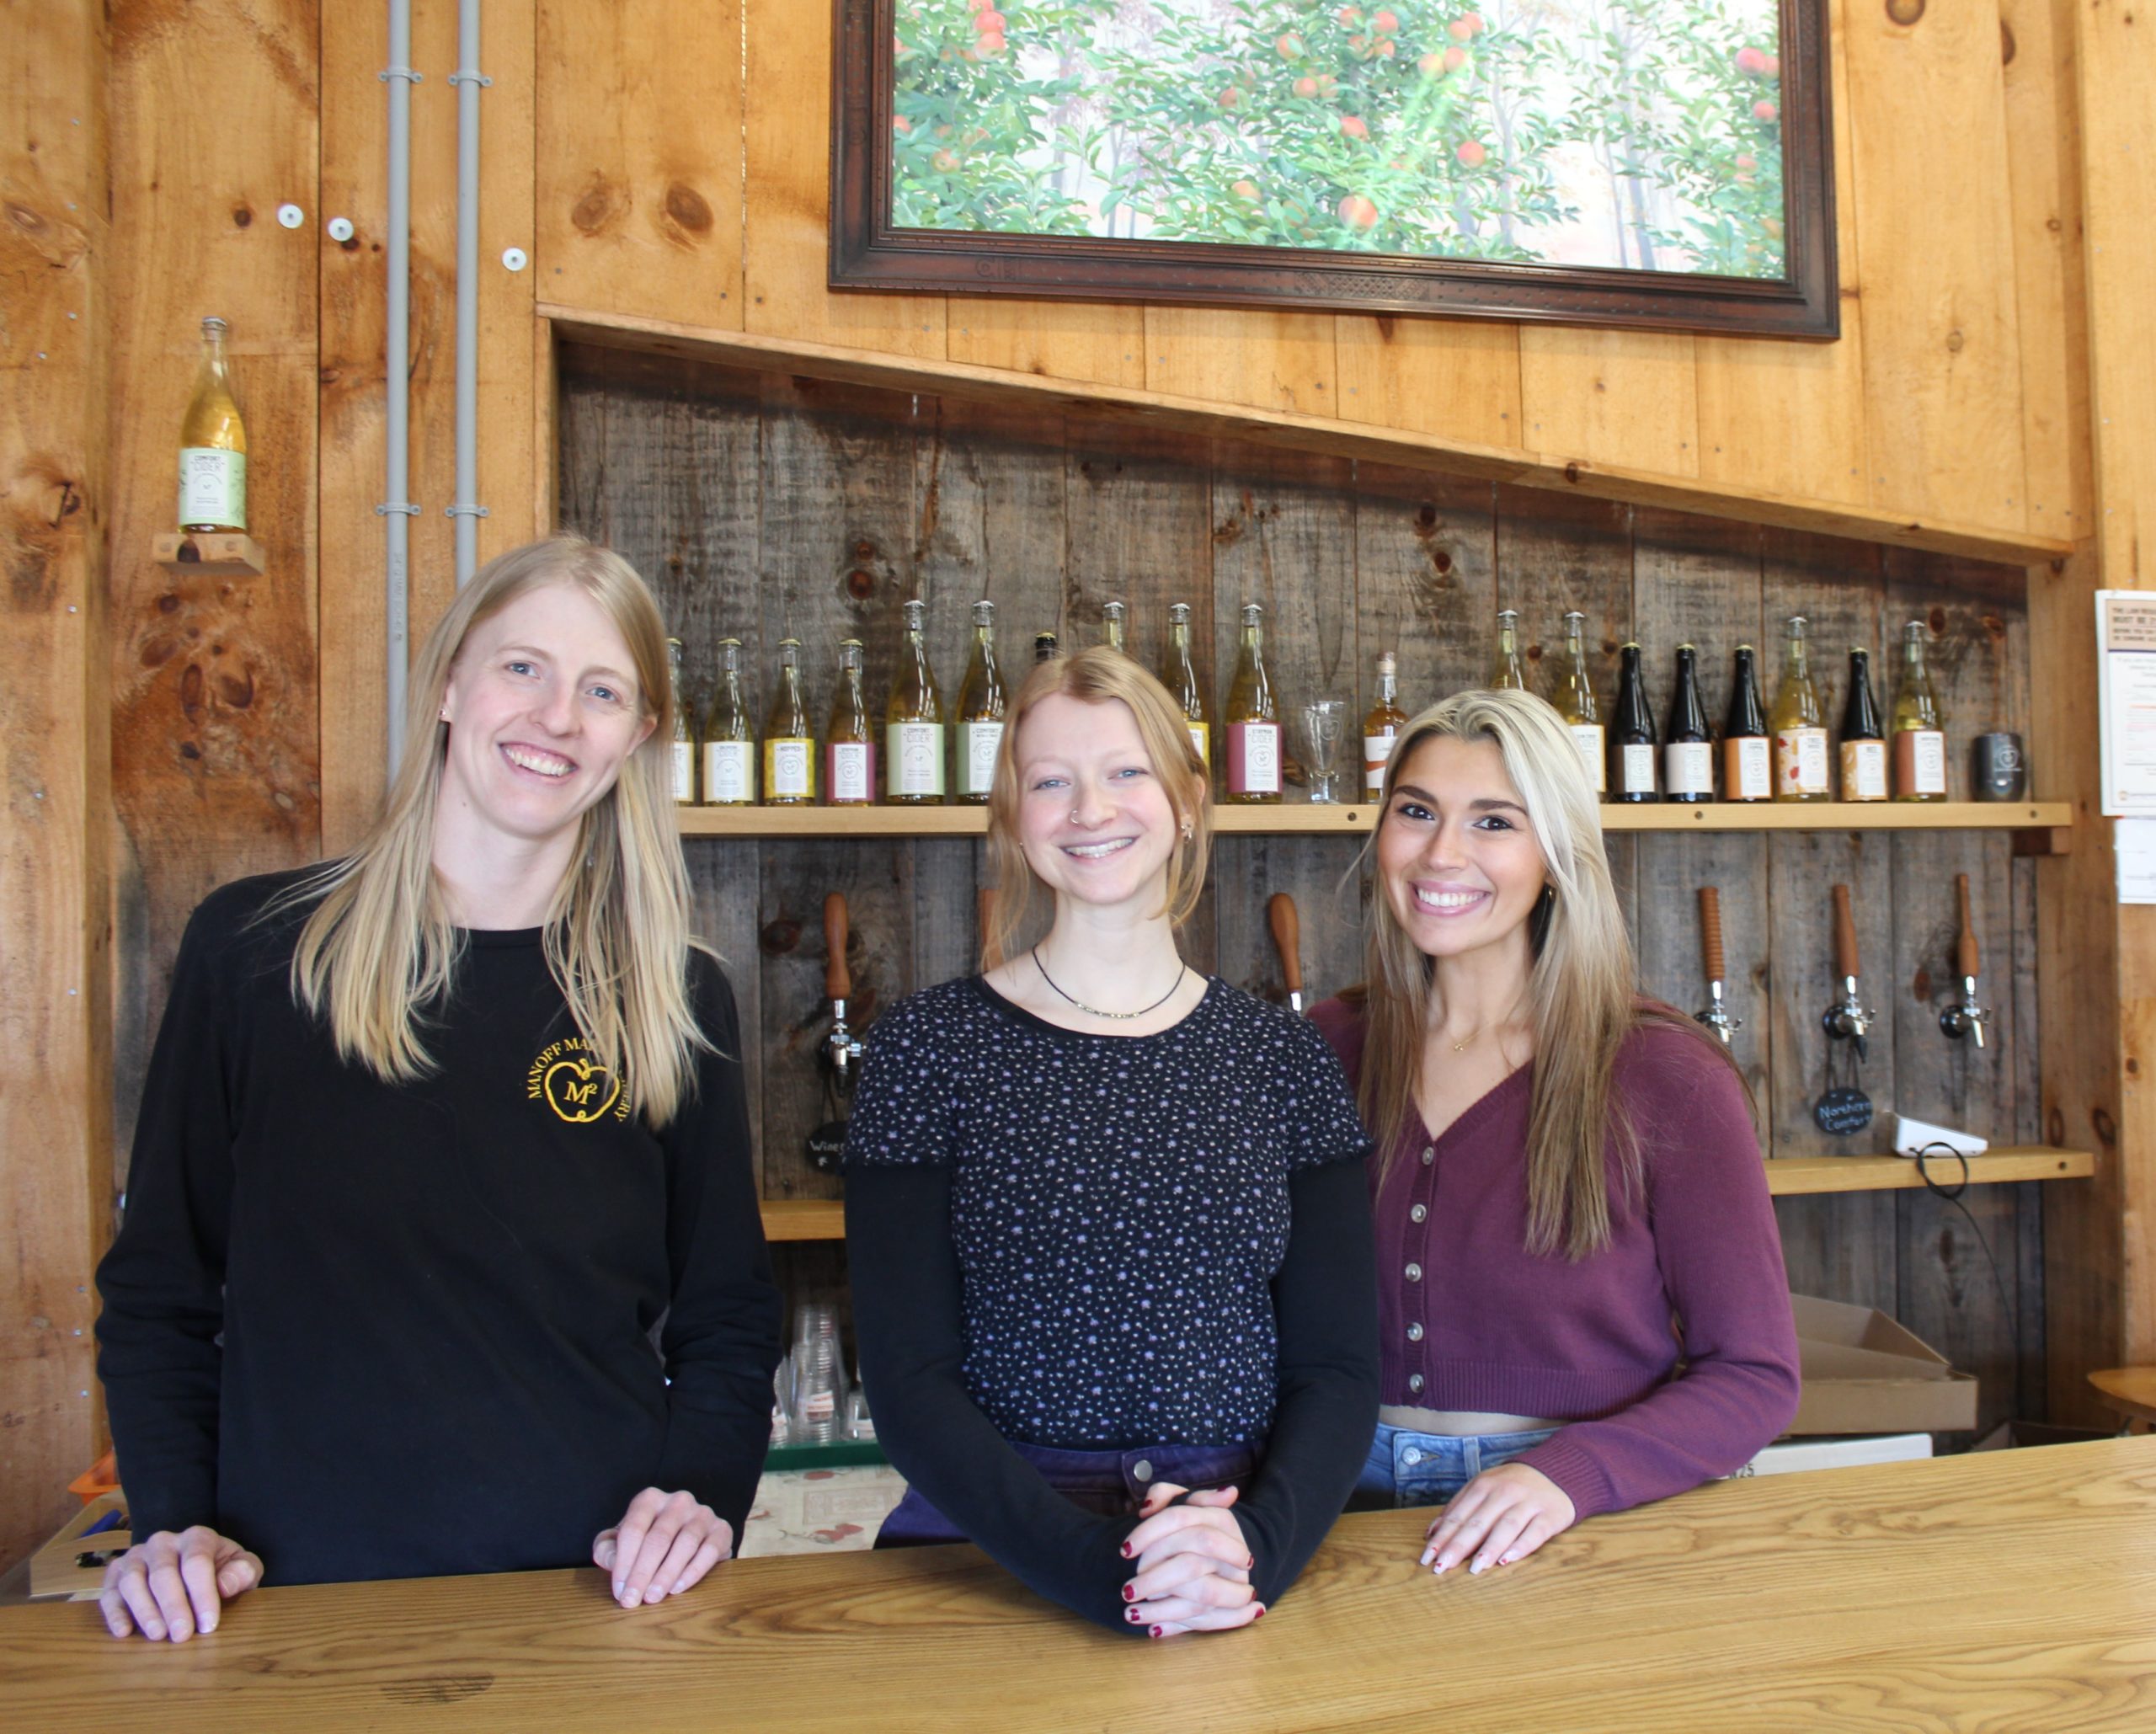 The tasting room at the Manoff Cidery is open Thursday through Saturday.